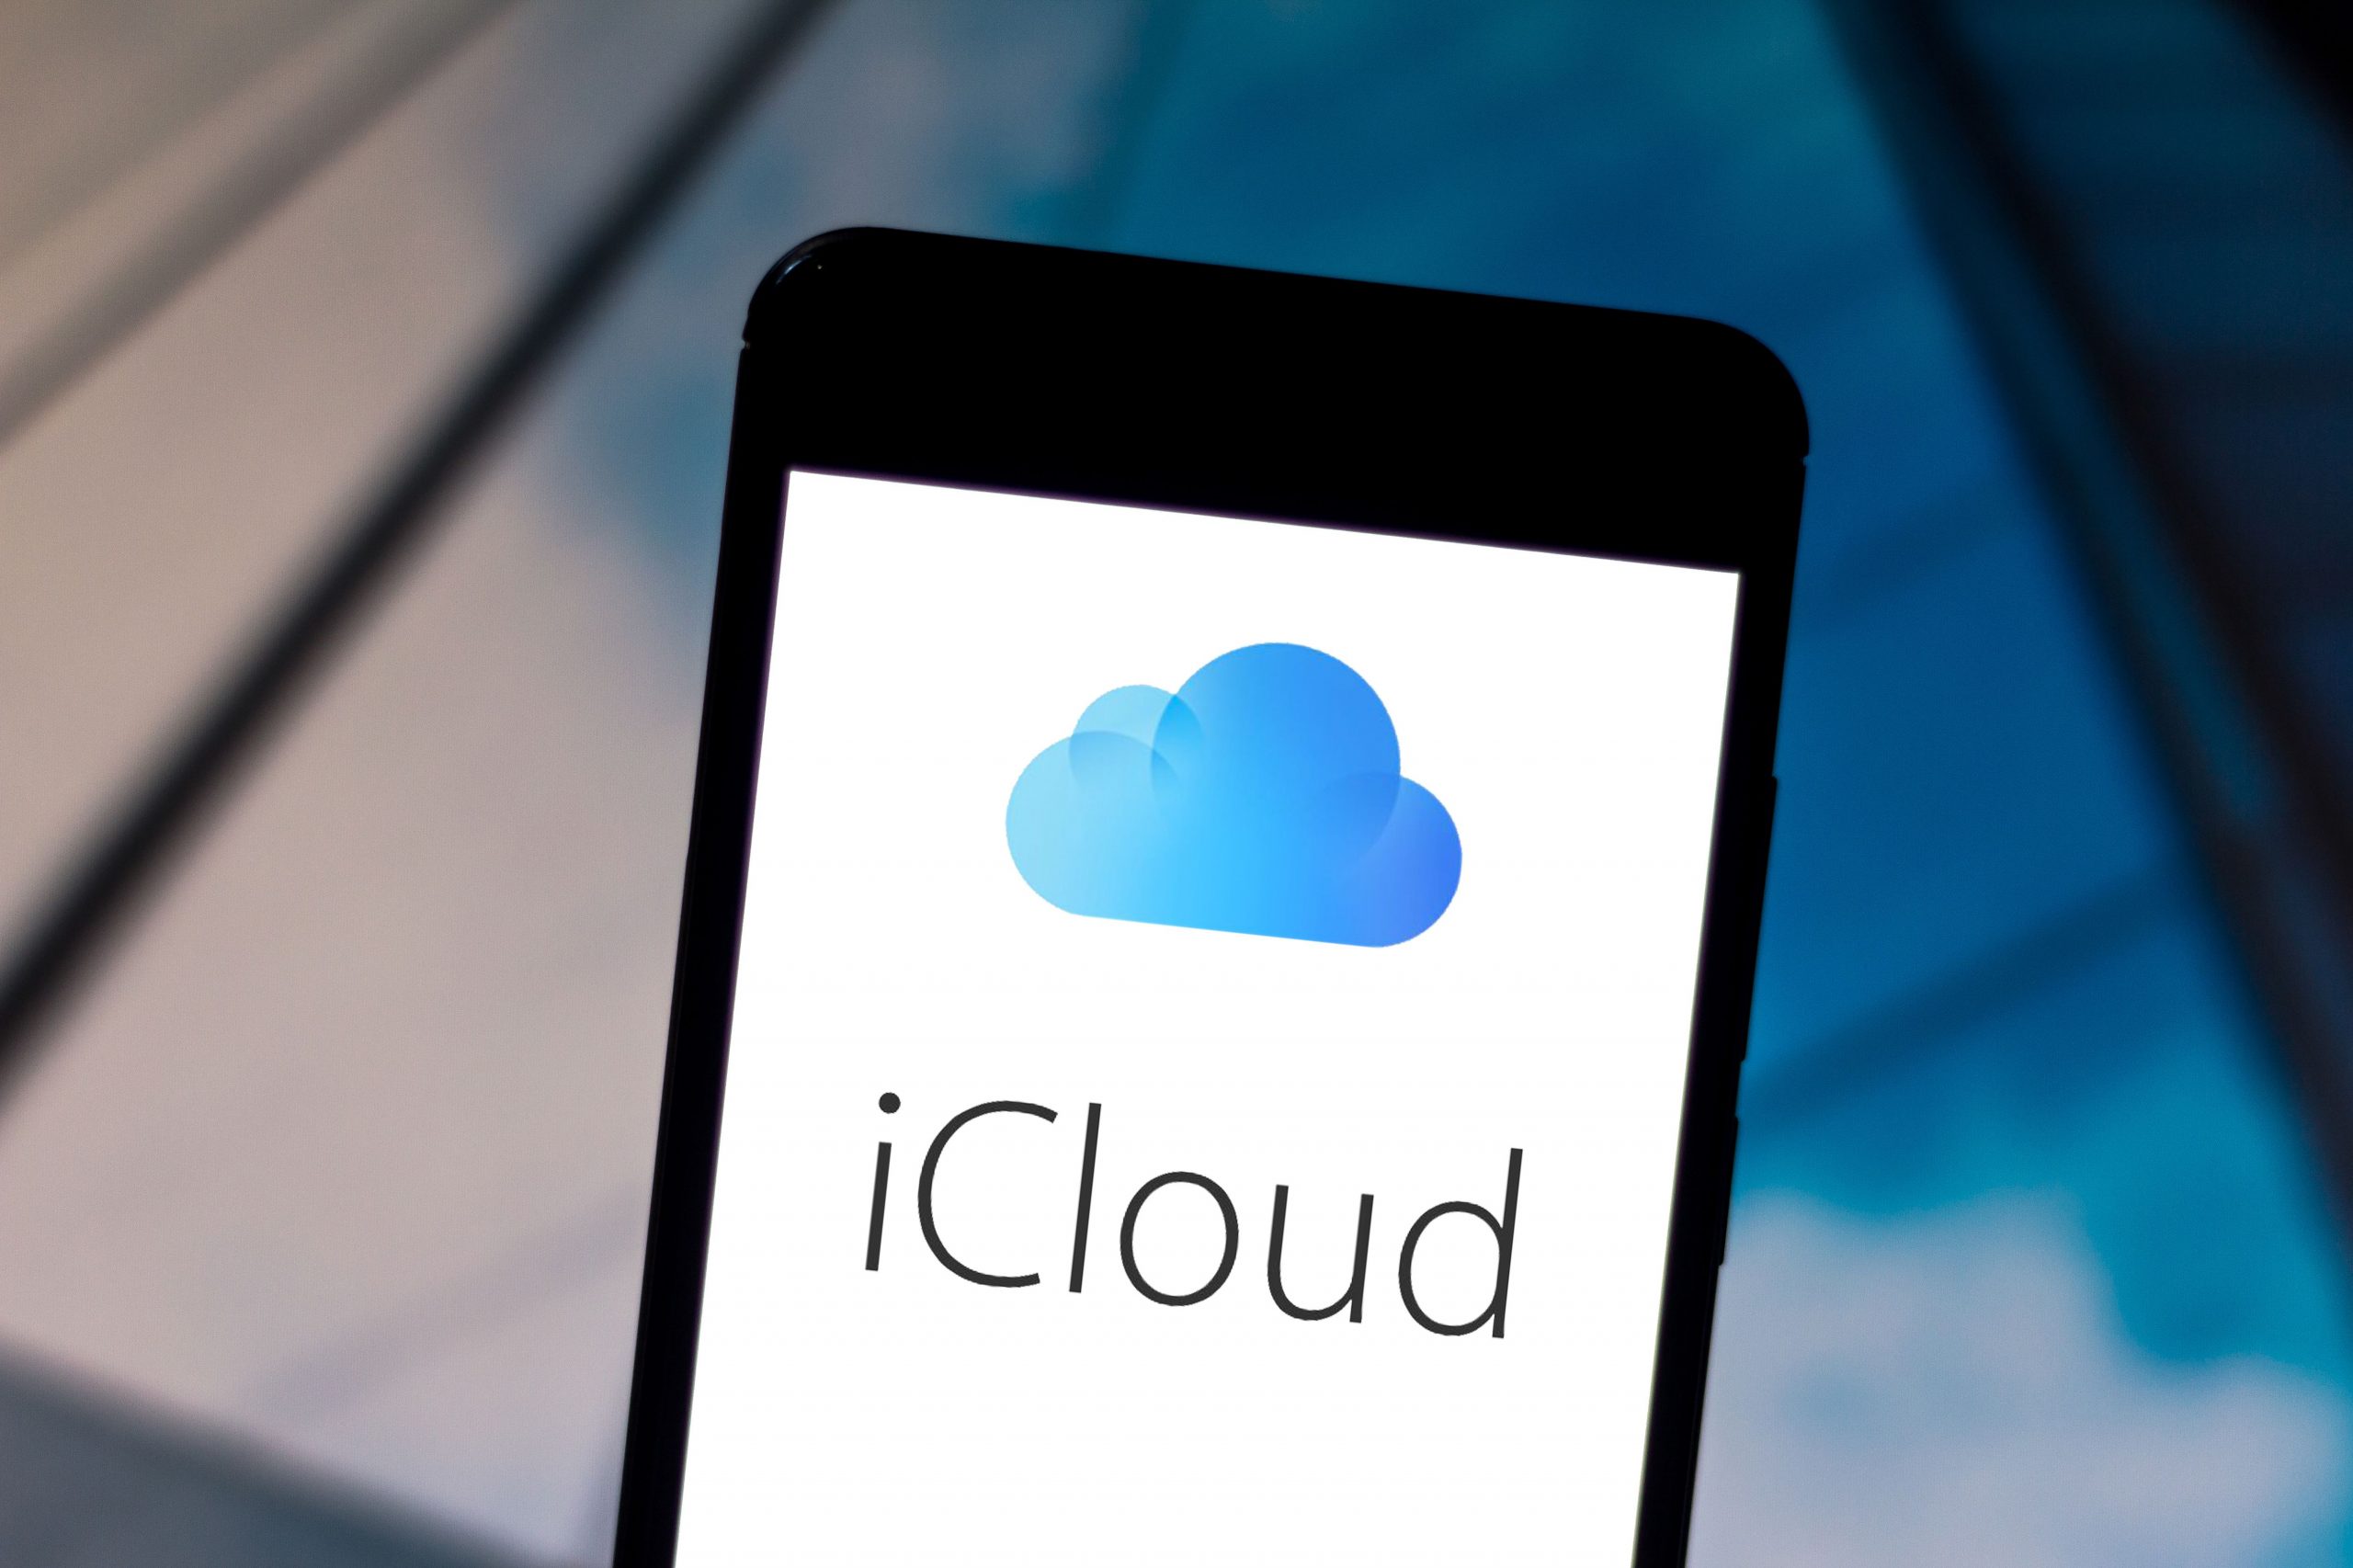 iCloud allegedly locked out a user over her last name